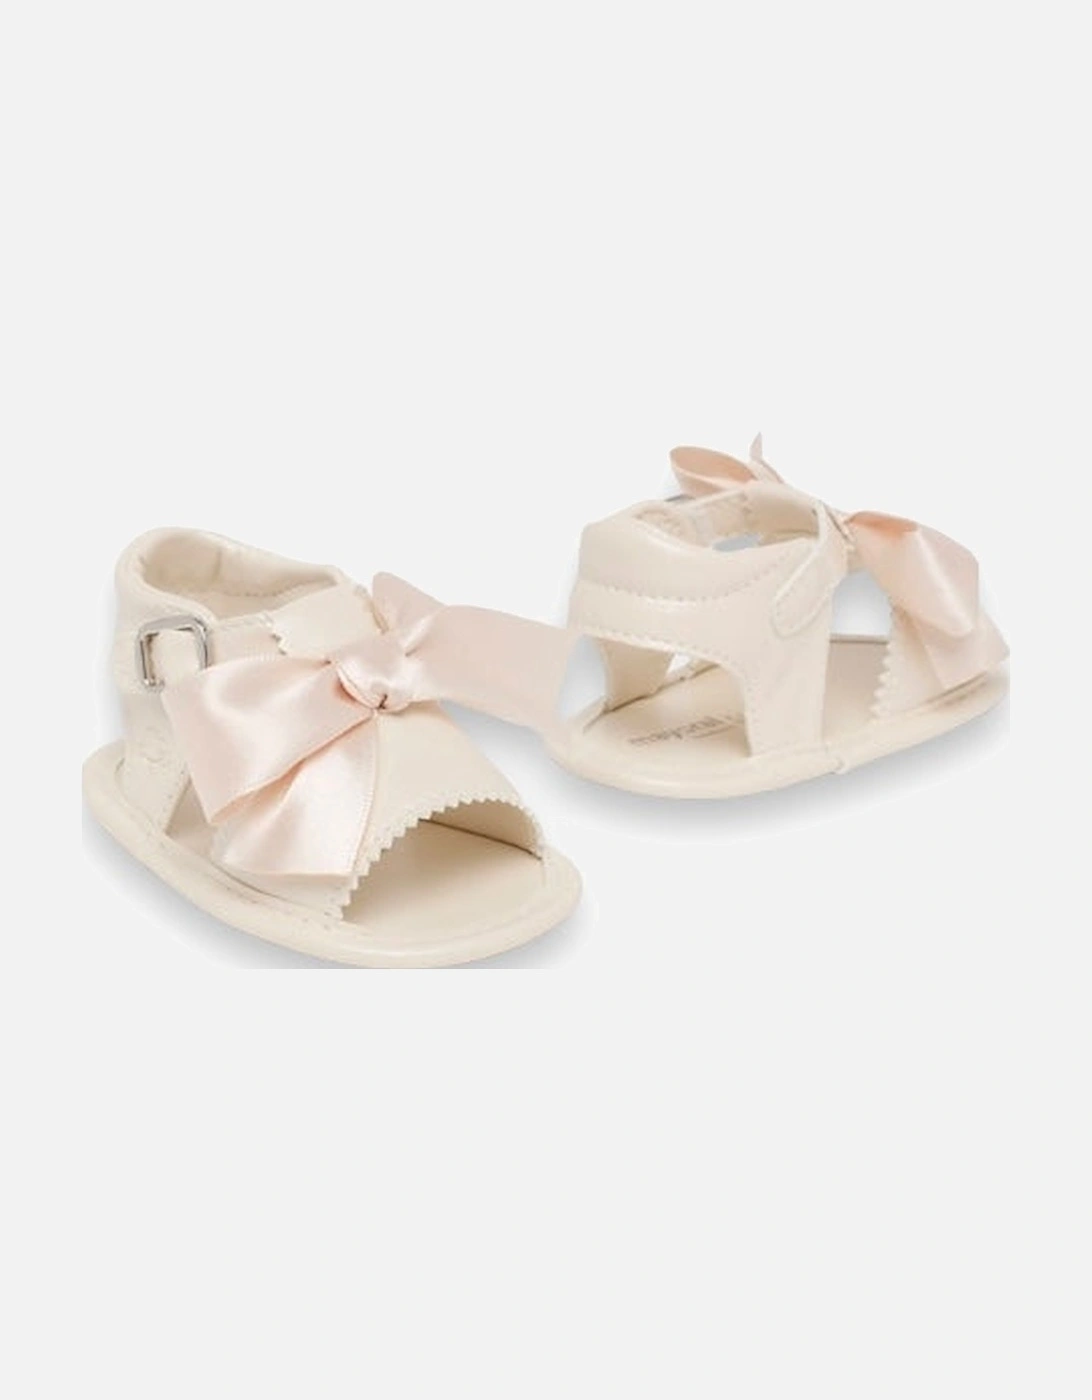 Pink Soft Sole Sandals